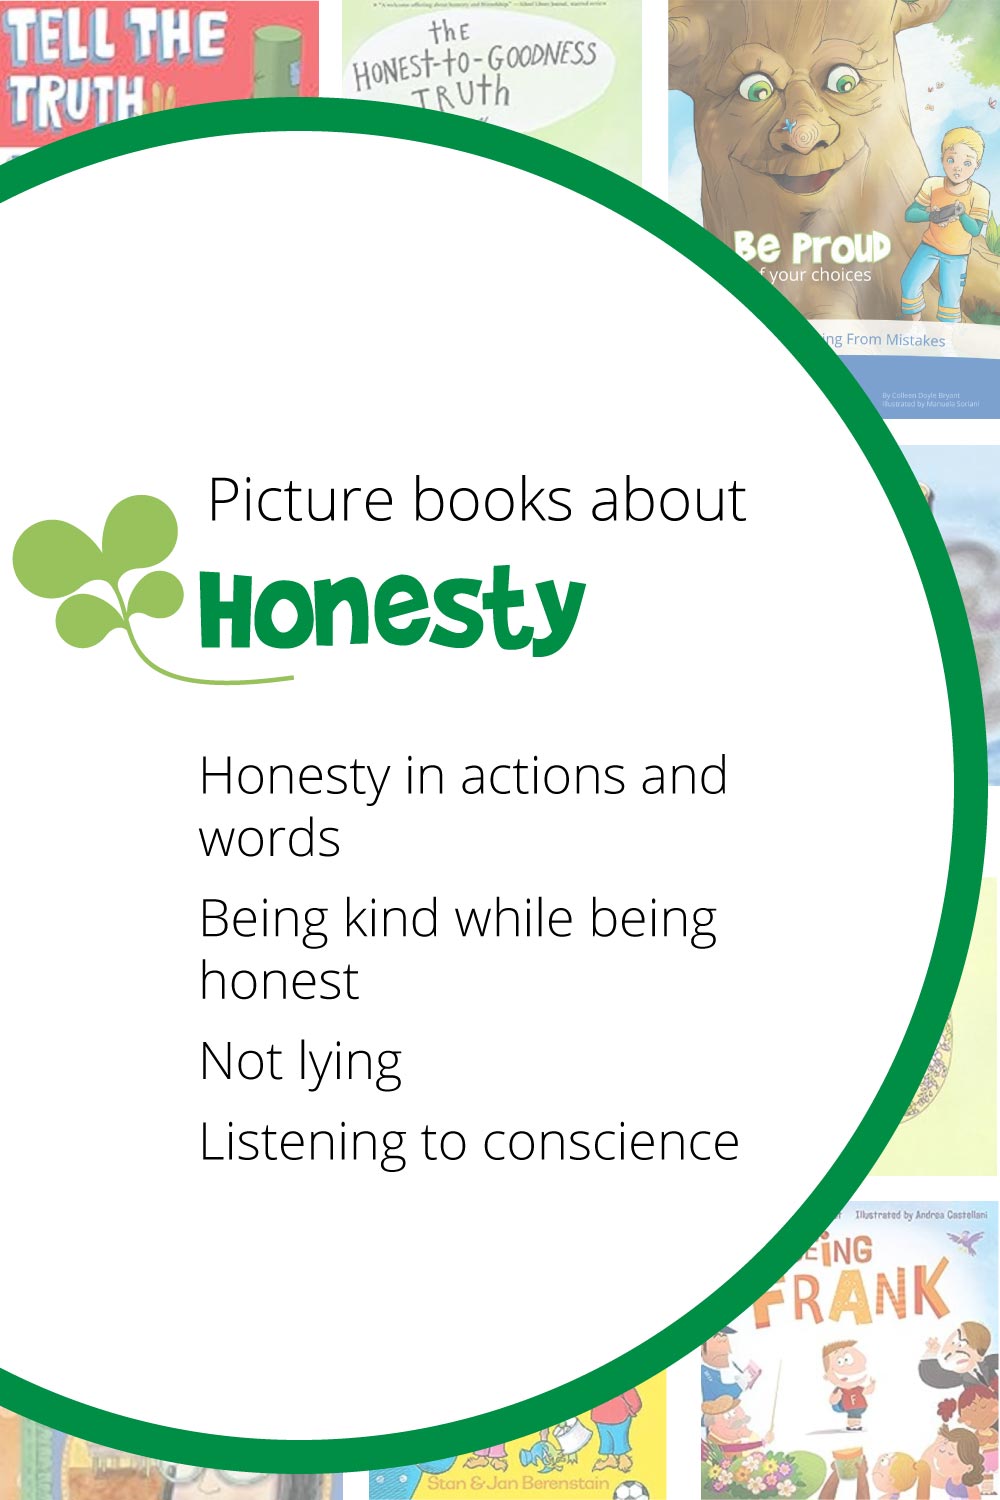 List of the best childrens books about honesty